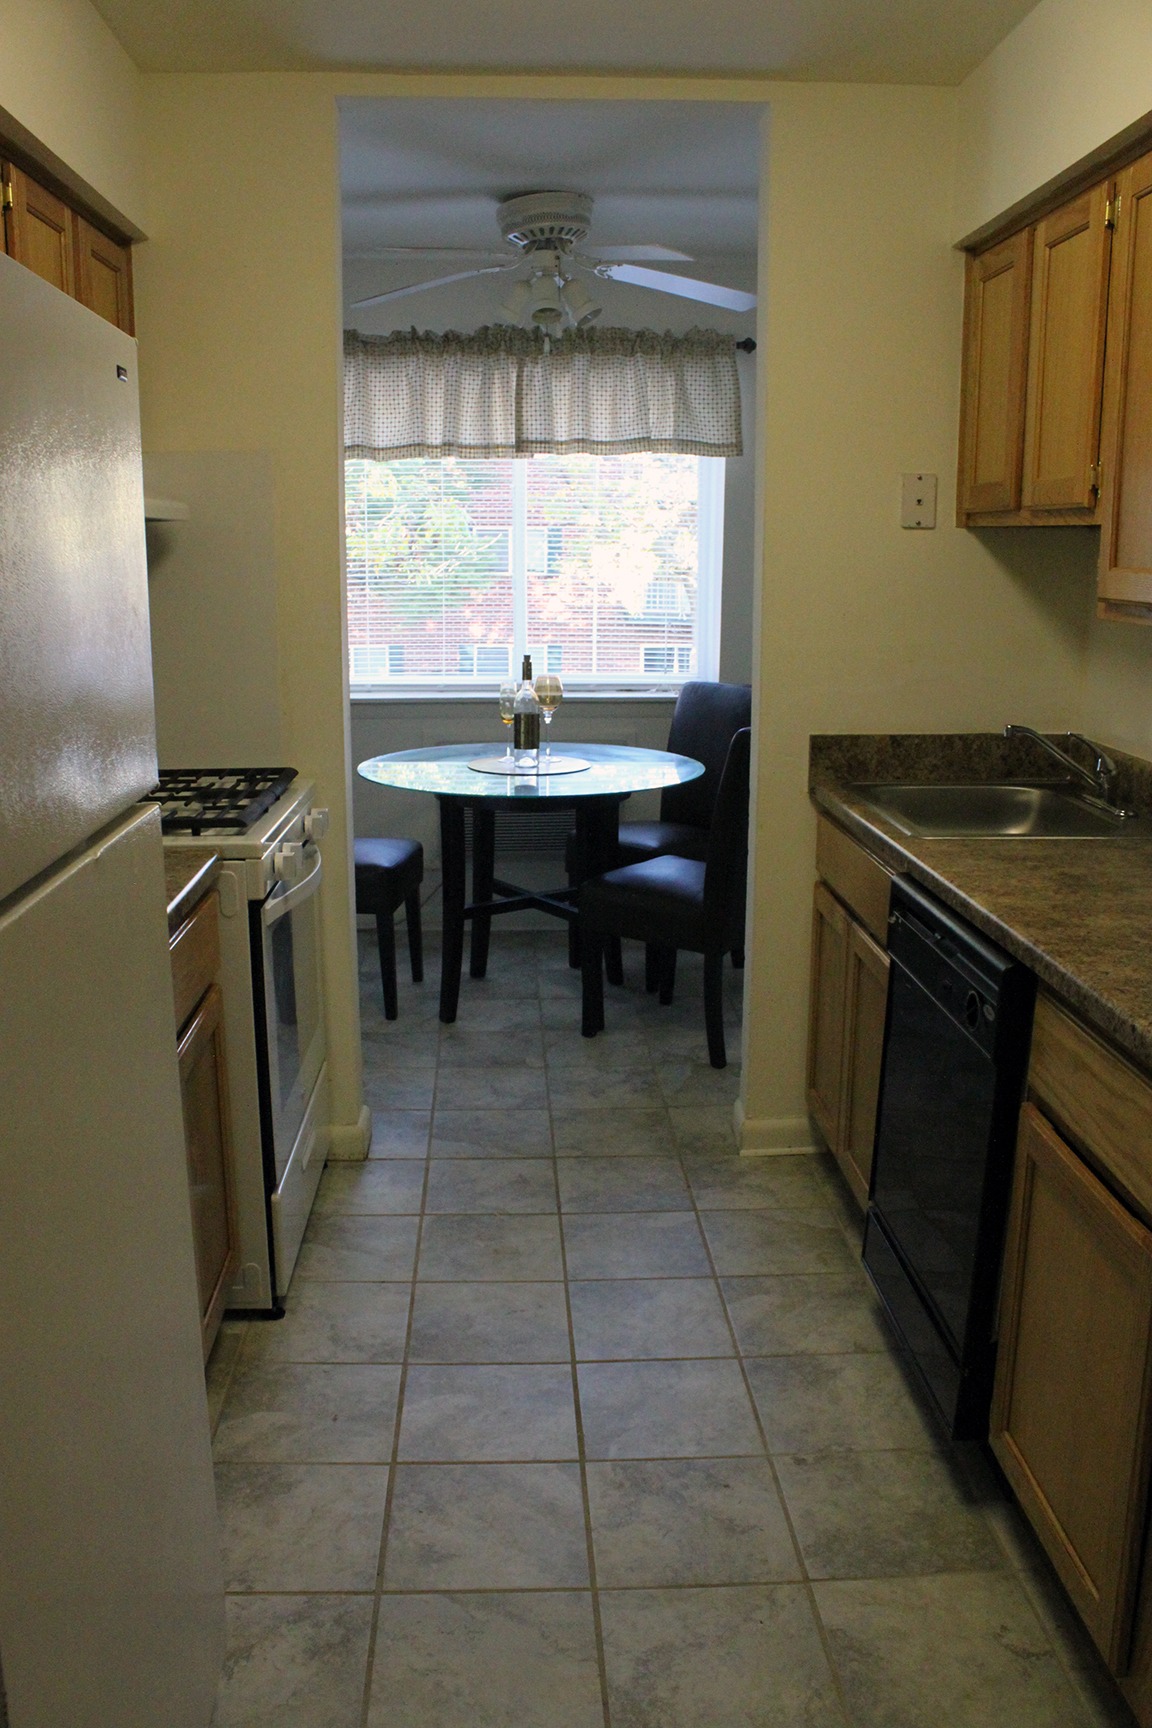 Kitchen area of an apartment, fitted with tiled flooring, spacious cabinets, and stainless steel appliances